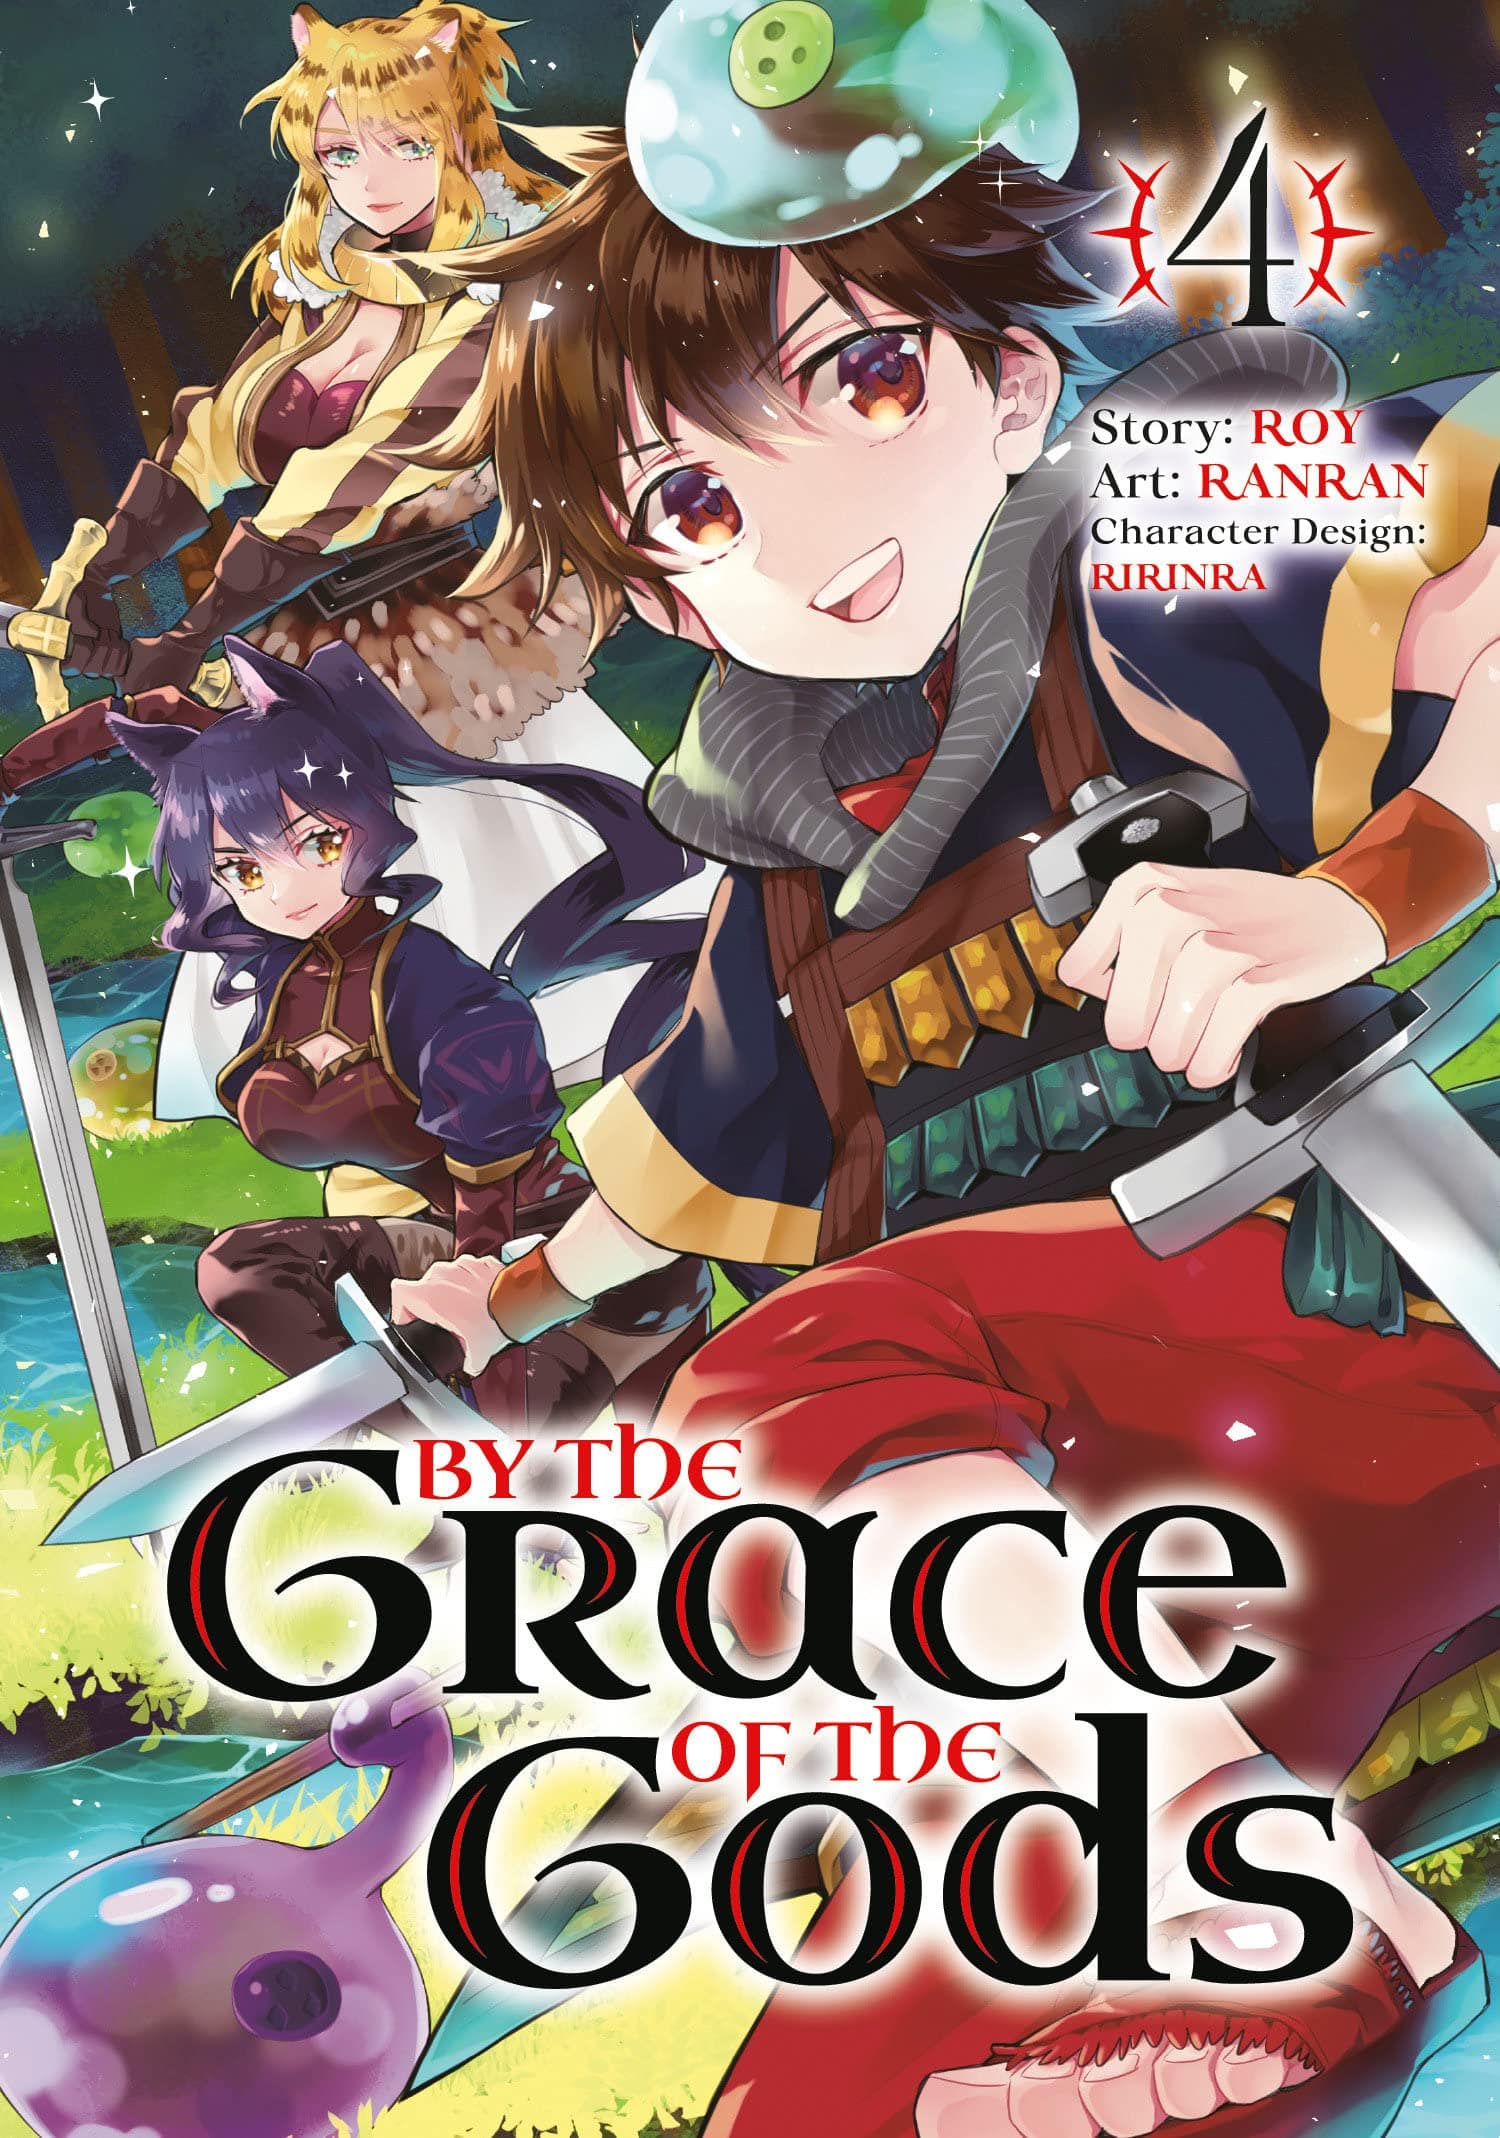 By the Grace of the Gods Vol. 4 - Third Eye